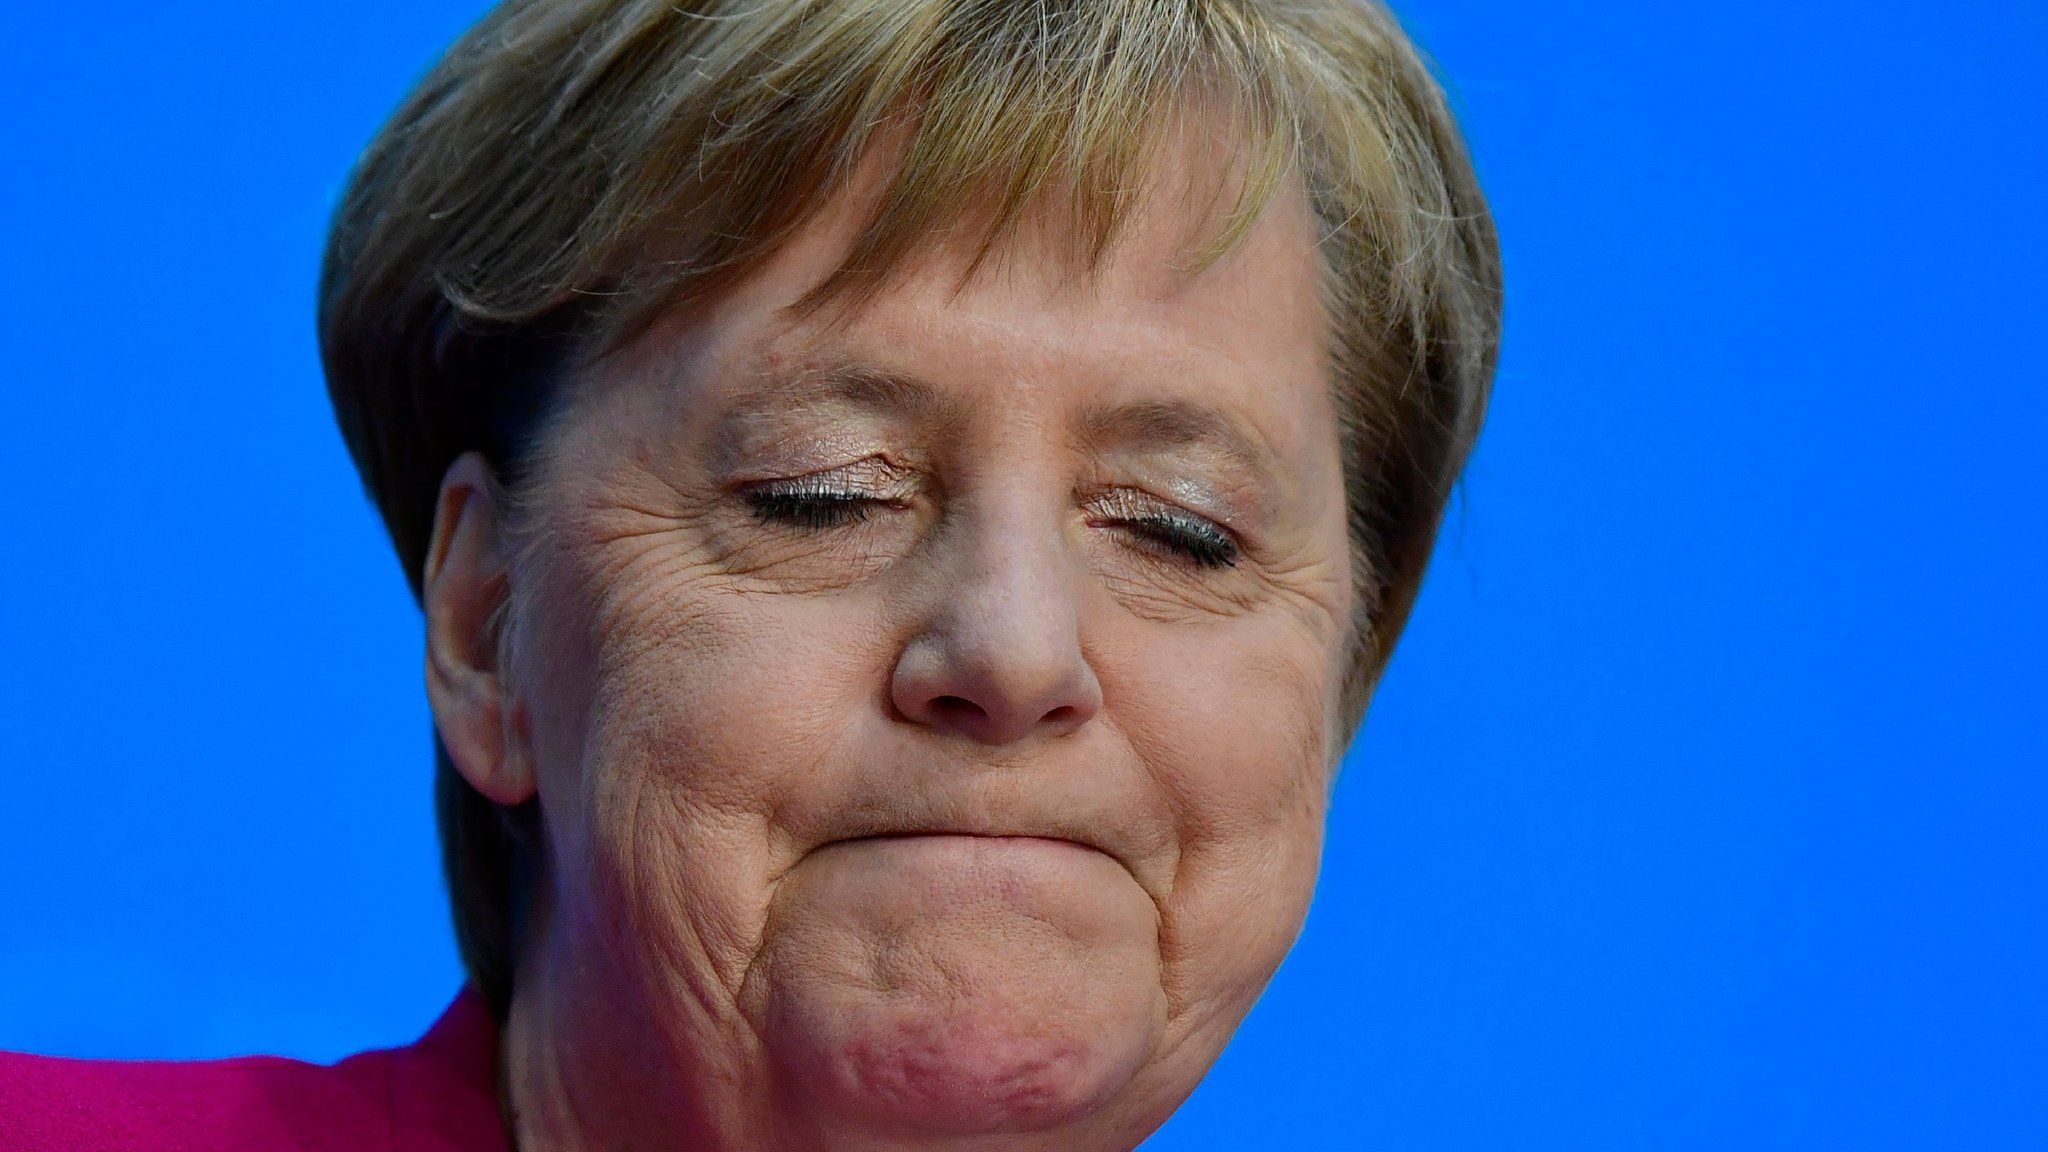 German Chancellor Angela Merkel closes her eyes as she gives a press conference on 29 October